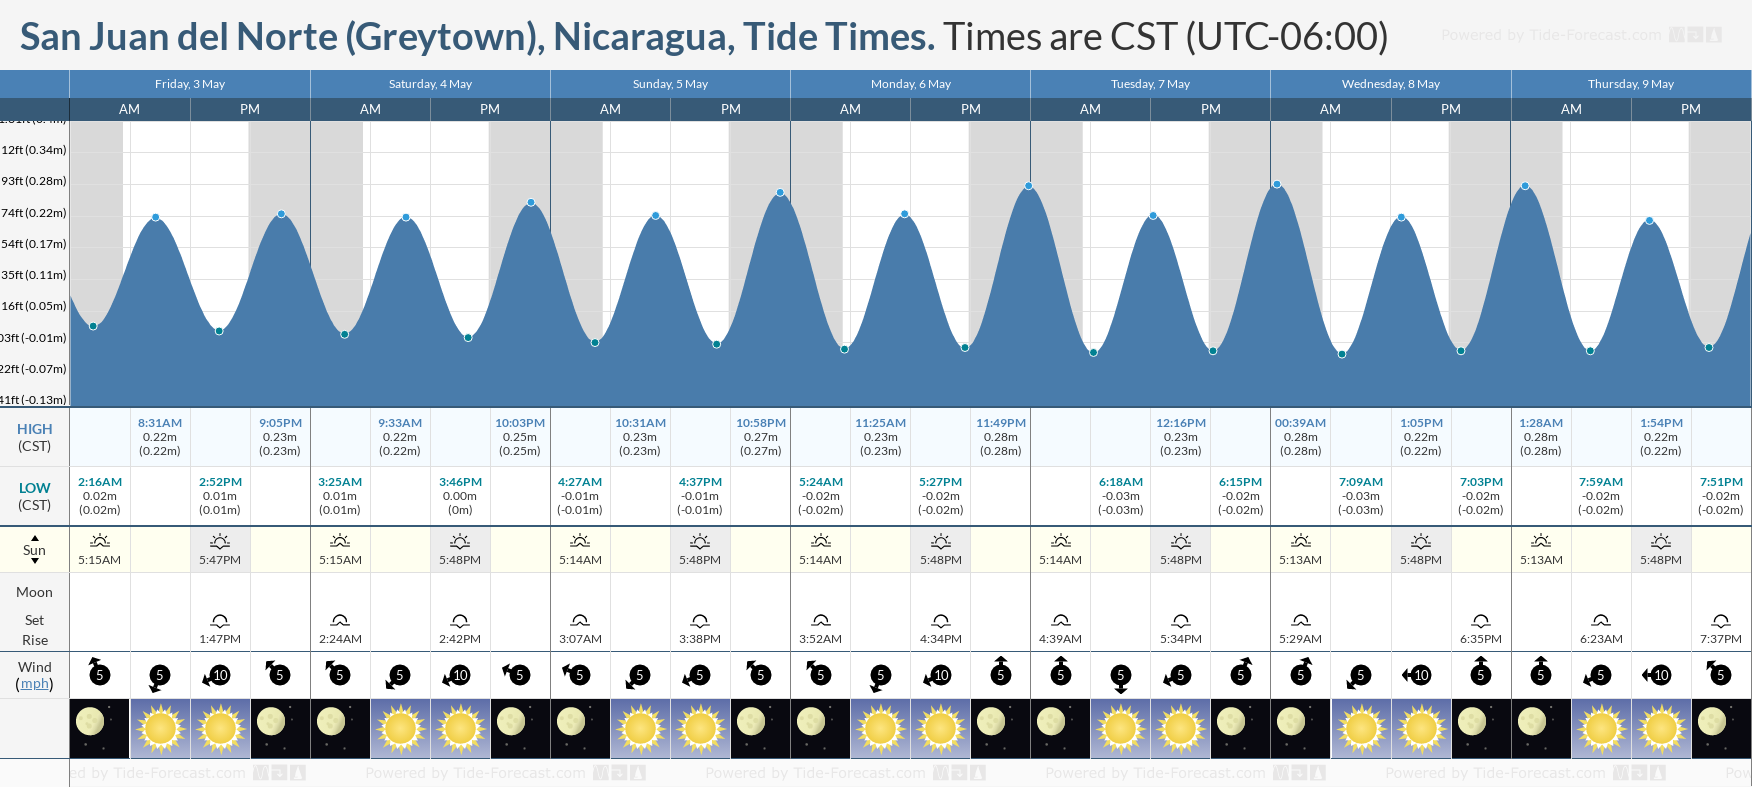 San Juan del Norte (Greytown), Nicaragua Tide Chart including high and low tide tide times for the next 7 days